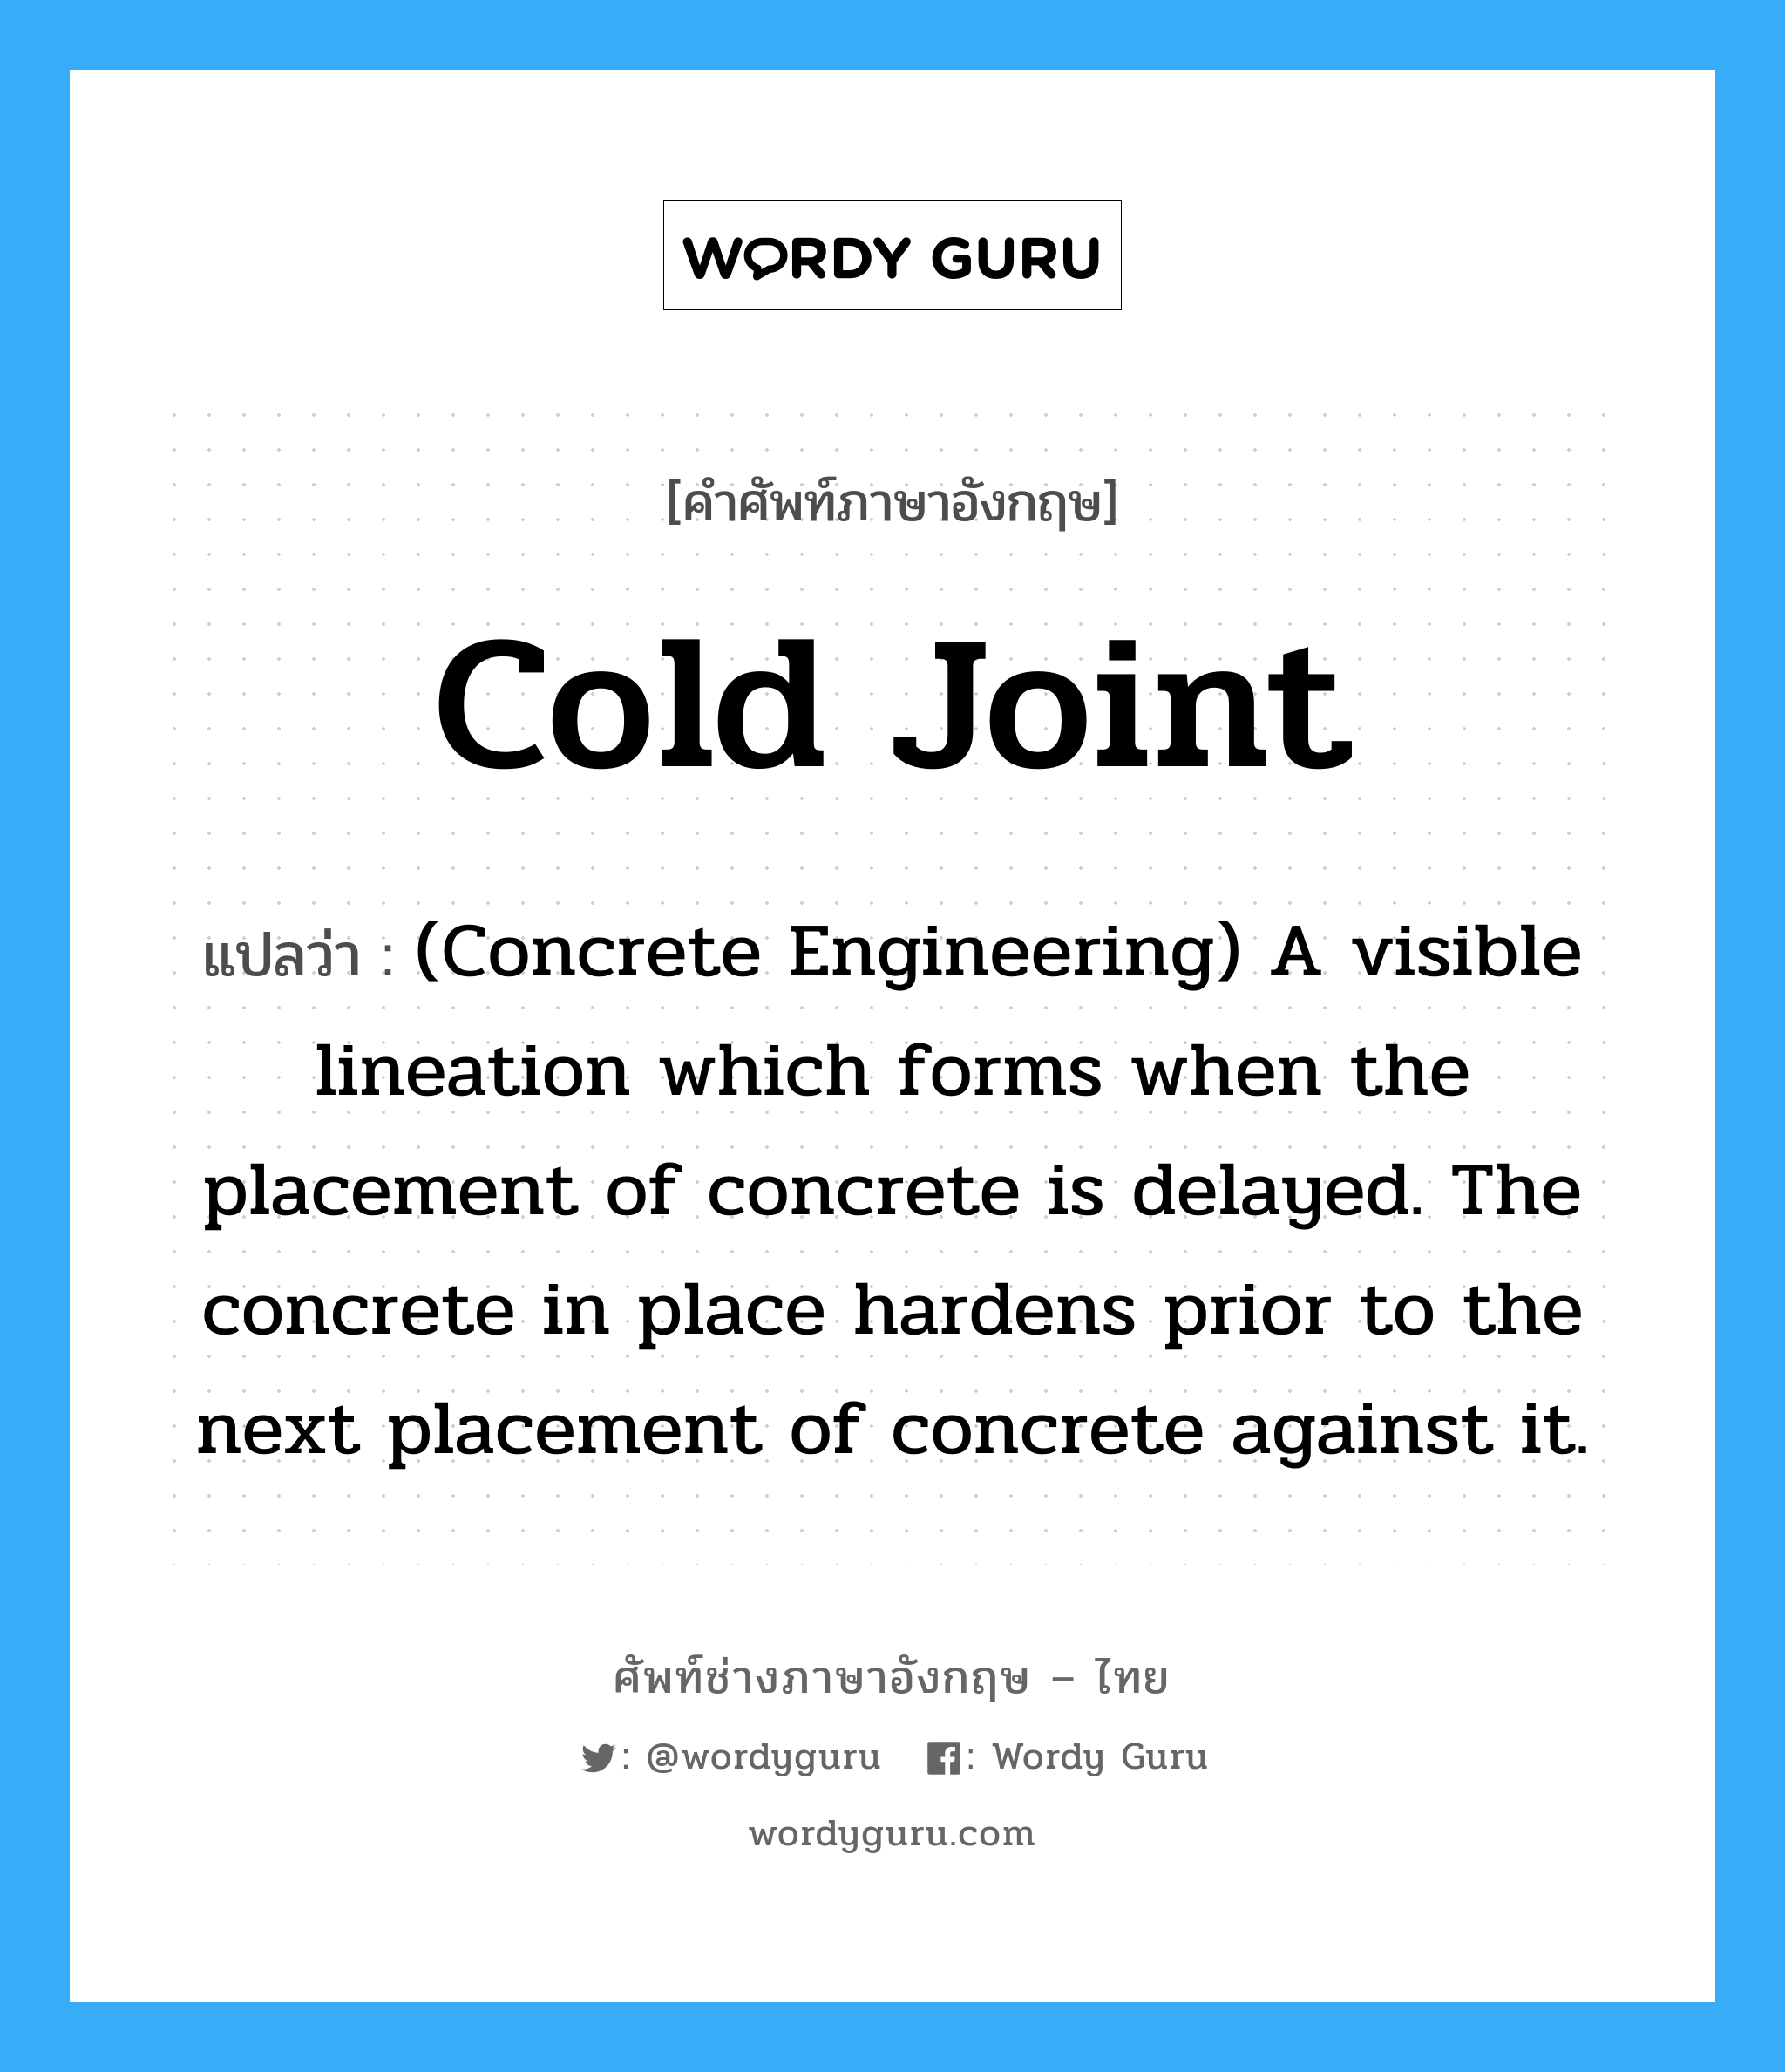 Cold Joint แปลว่า?, คำศัพท์ช่างภาษาอังกฤษ - ไทย Cold Joint คำศัพท์ภาษาอังกฤษ Cold Joint แปลว่า (Concrete Engineering) A visible lineation which forms when the placement of concrete is delayed. The concrete in place hardens prior to the next placement of concrete against it.